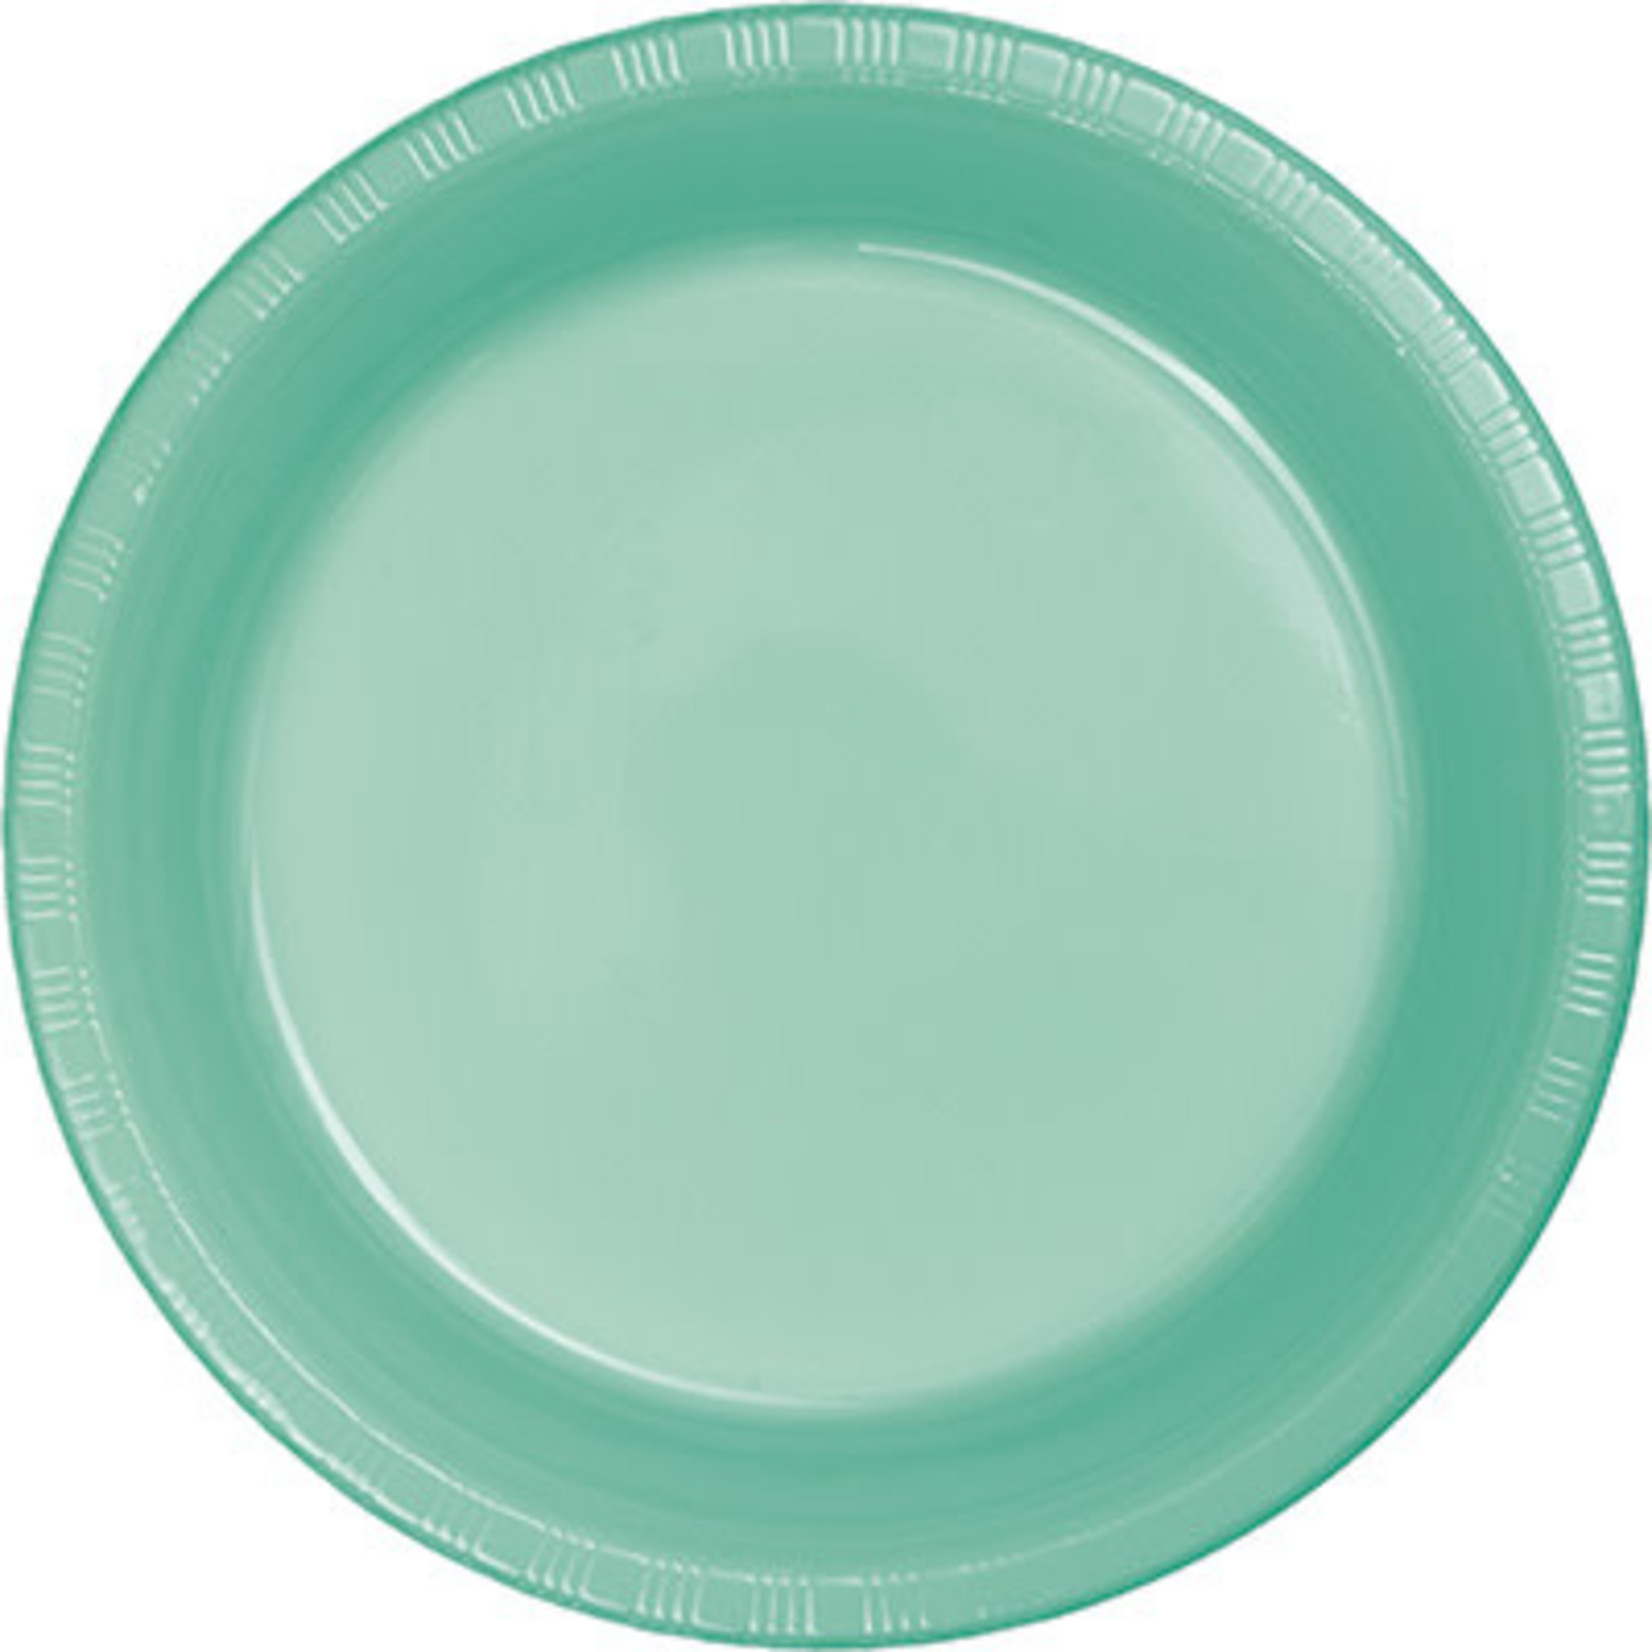 Touch of Color 7" Teal Lagoon Paper Plates - 24ct.